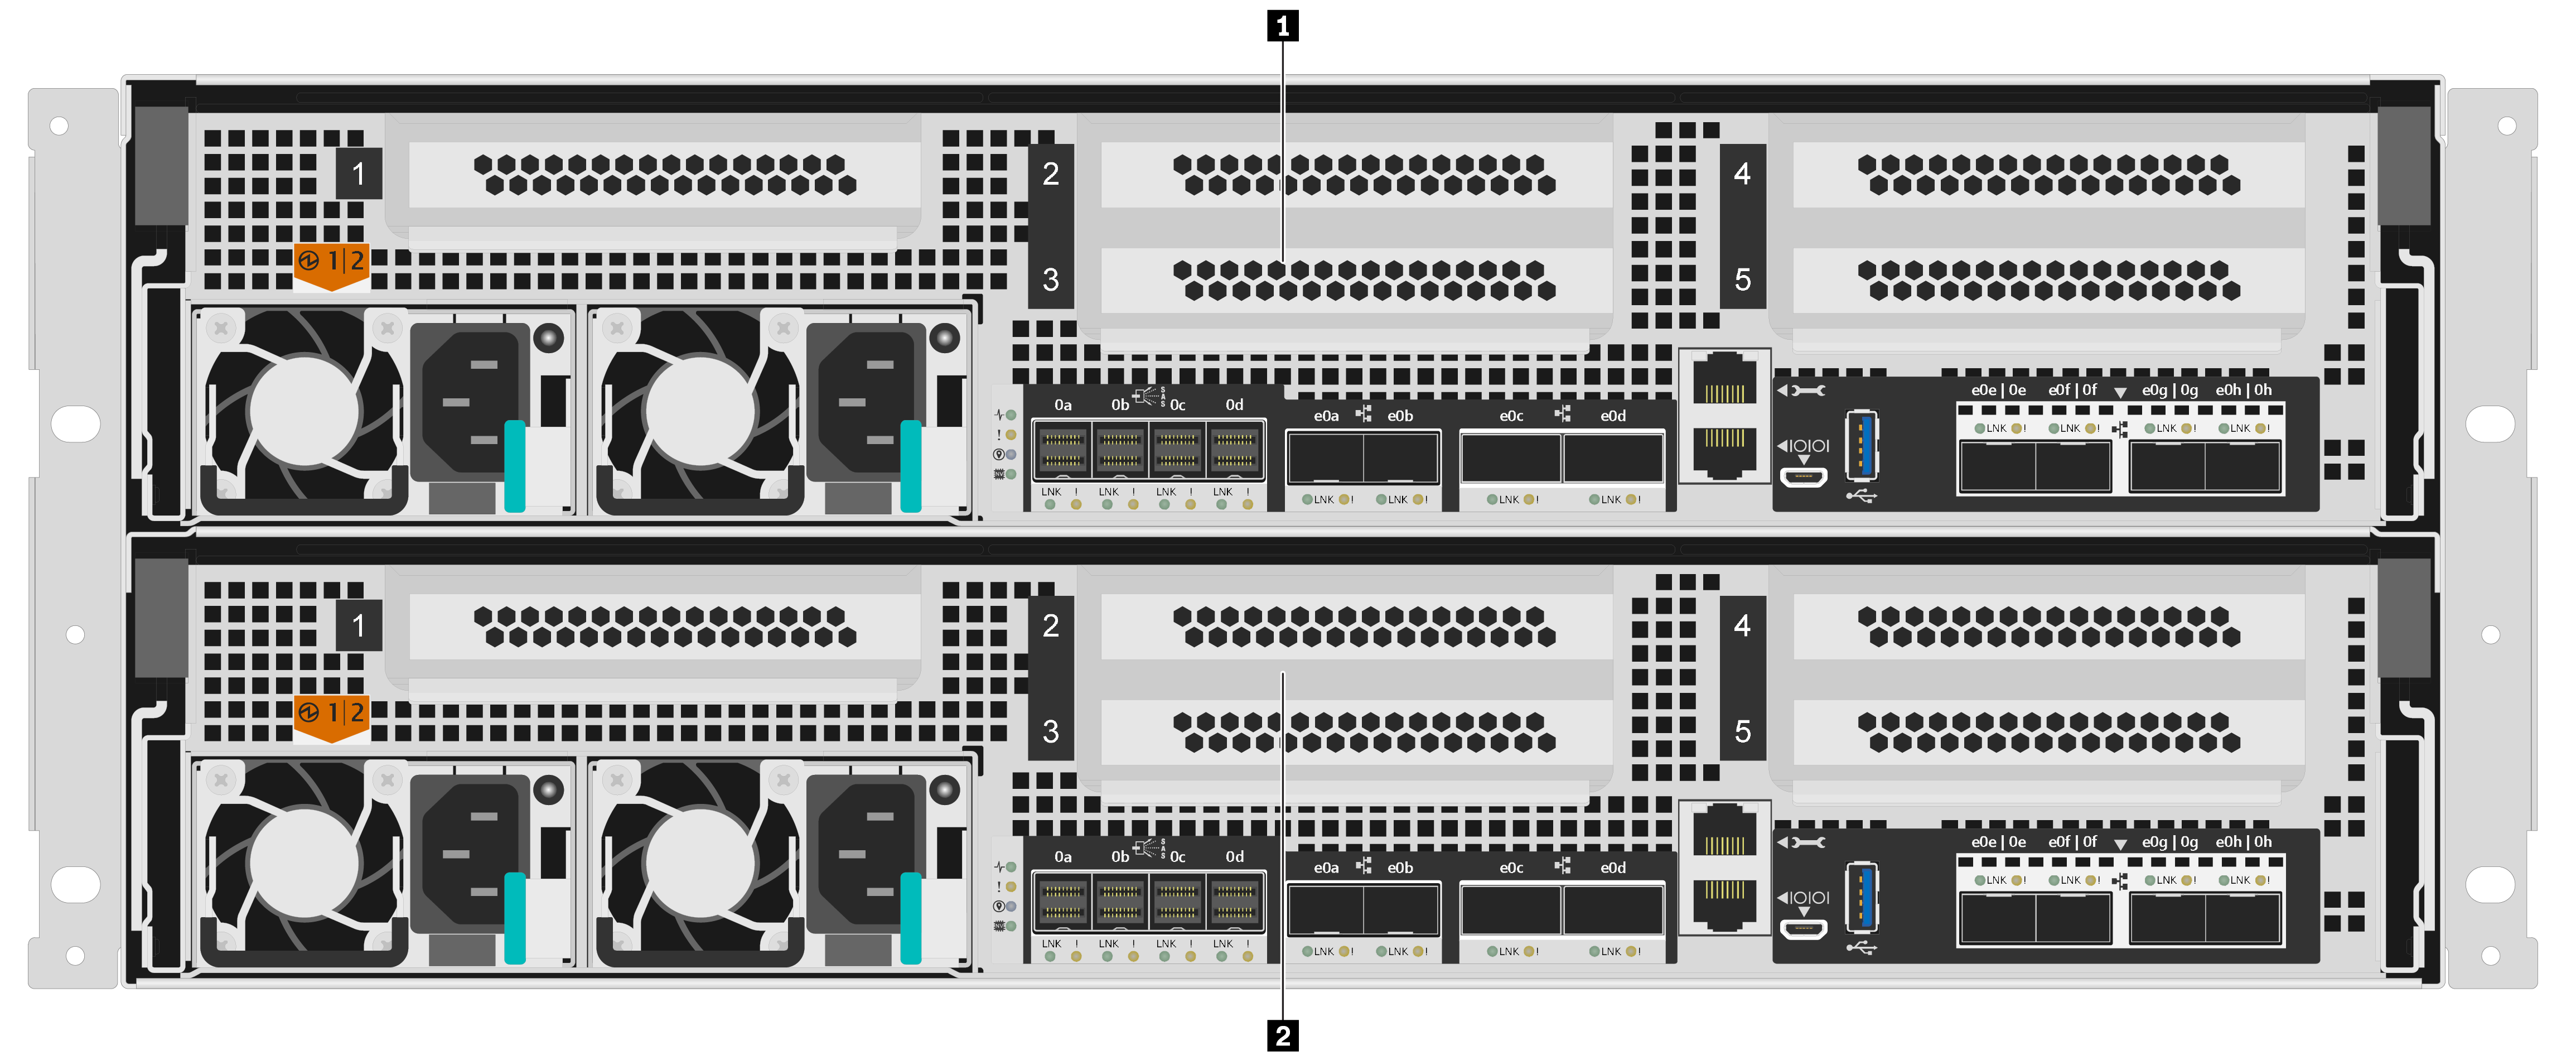 Rear view with dual, high availability, nodes